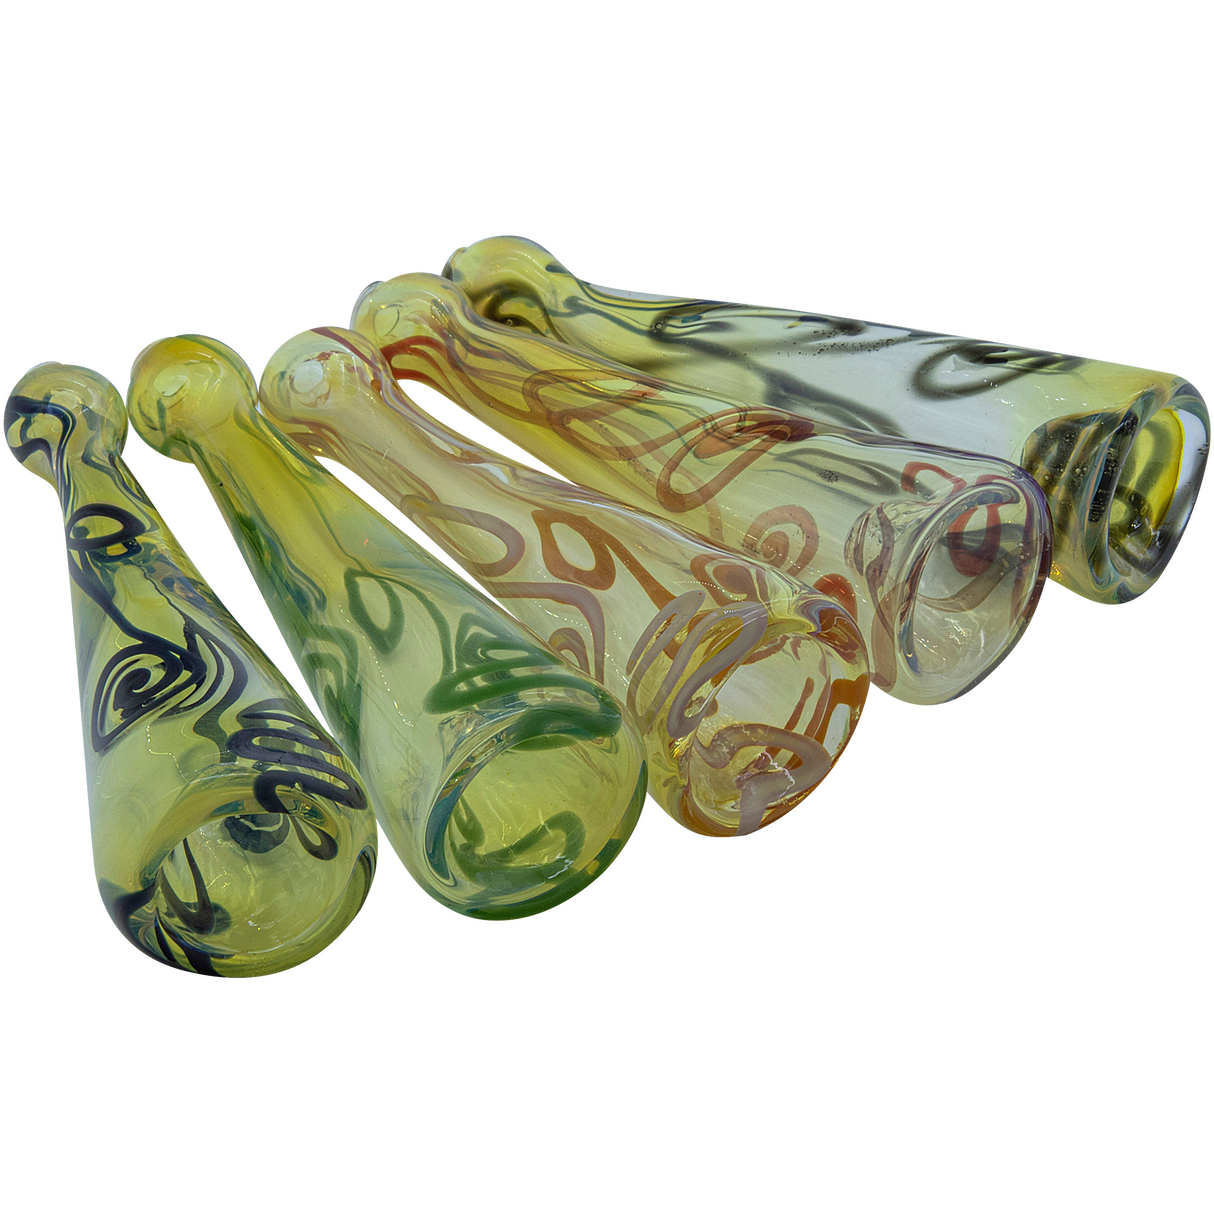 LA Pipes Inside-Out Funnel Chillum Herb Pipes, Fumed Color Changing, 4.5" Length